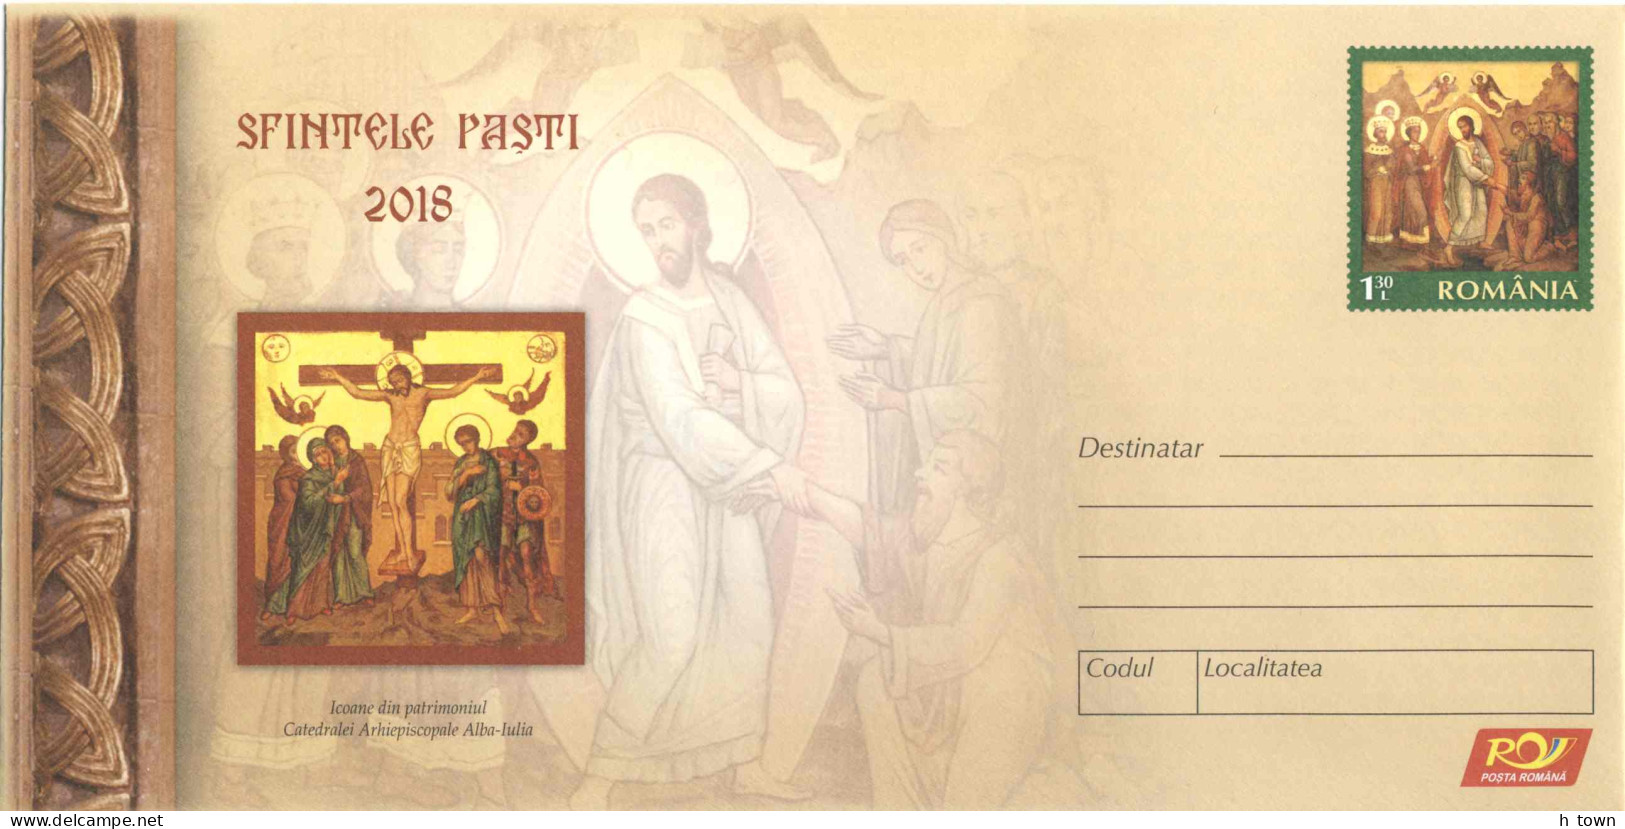 824  Icône, Pâques: PAP 2018  - Icon Of The Eastern Orthodox Church: Postal Stationery Cover - Cuadros